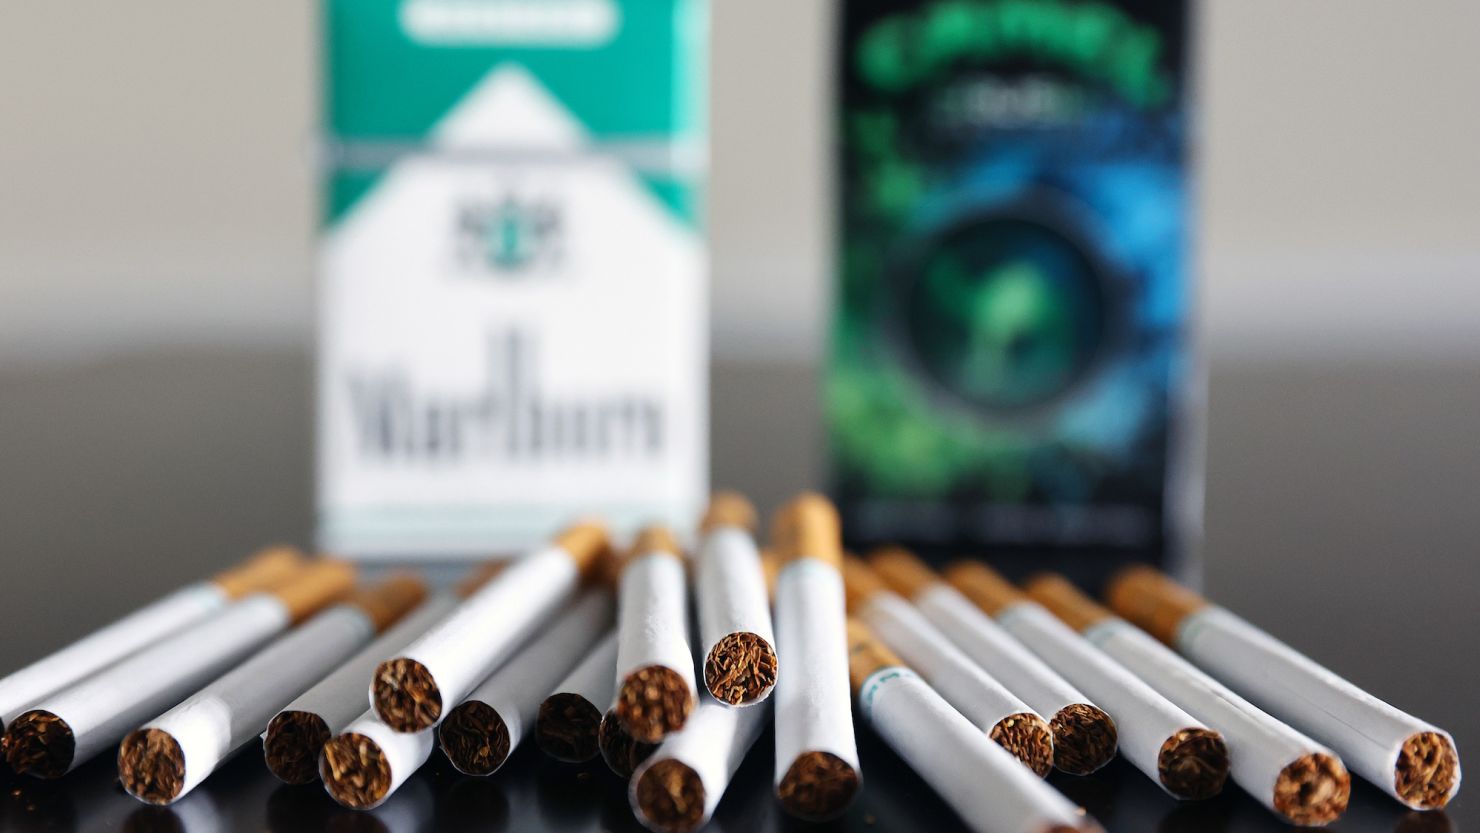 HHS Secretary Xavier Becerra said the decision on banning menthol cigarettes "will take significantly more time."